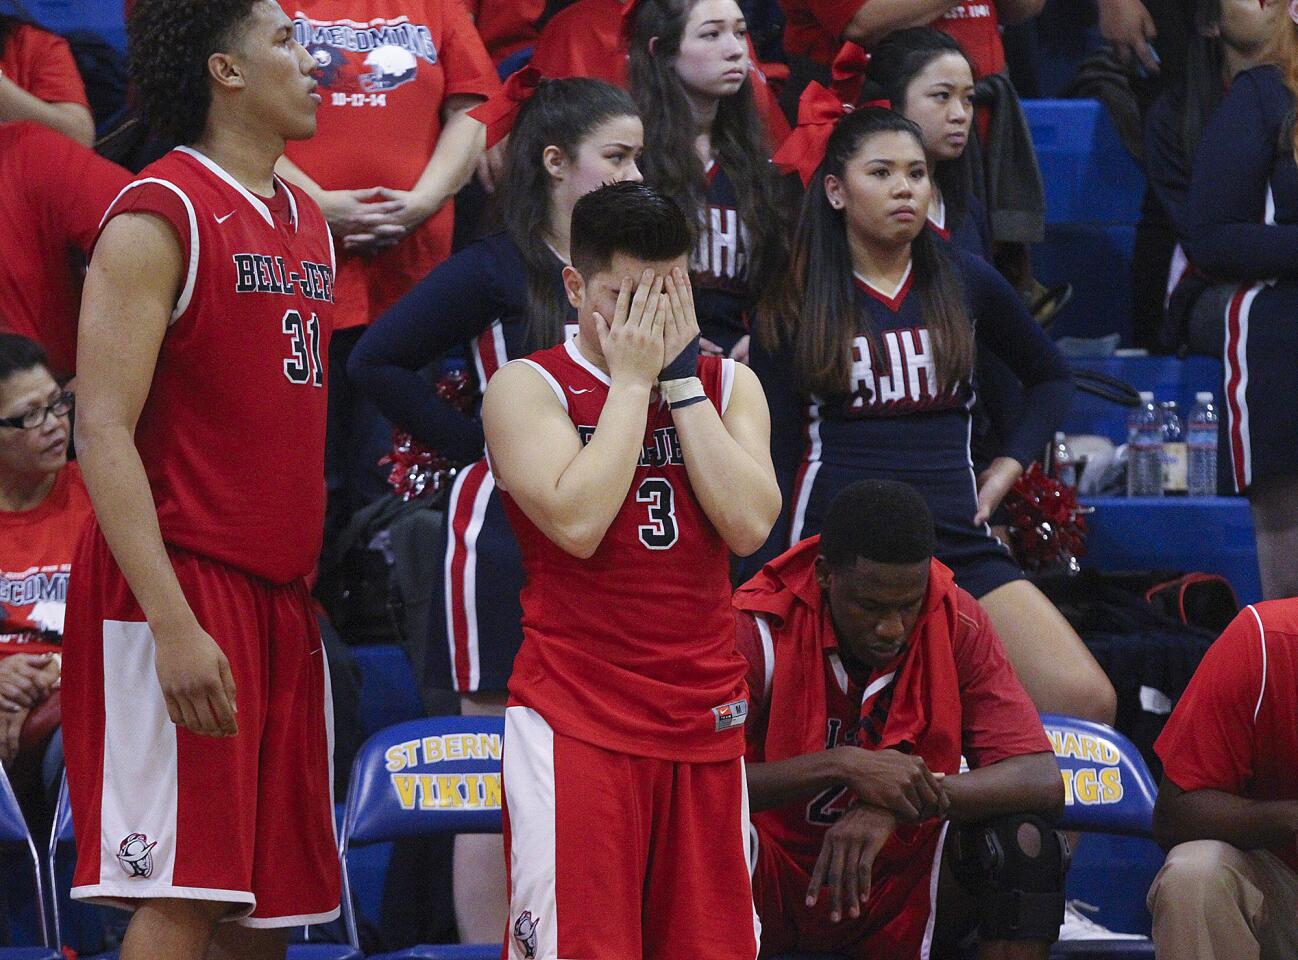 Bell-Jeff's Marco Escribano covers his face in despair as the game comes to an end with a loss against St. Bernard in the CIF Division V-A boys basketball semifinal game at St. Bernard High School in Playa Del Rey on Friday, February 27, 2015. Bell-Jeff lost the game.